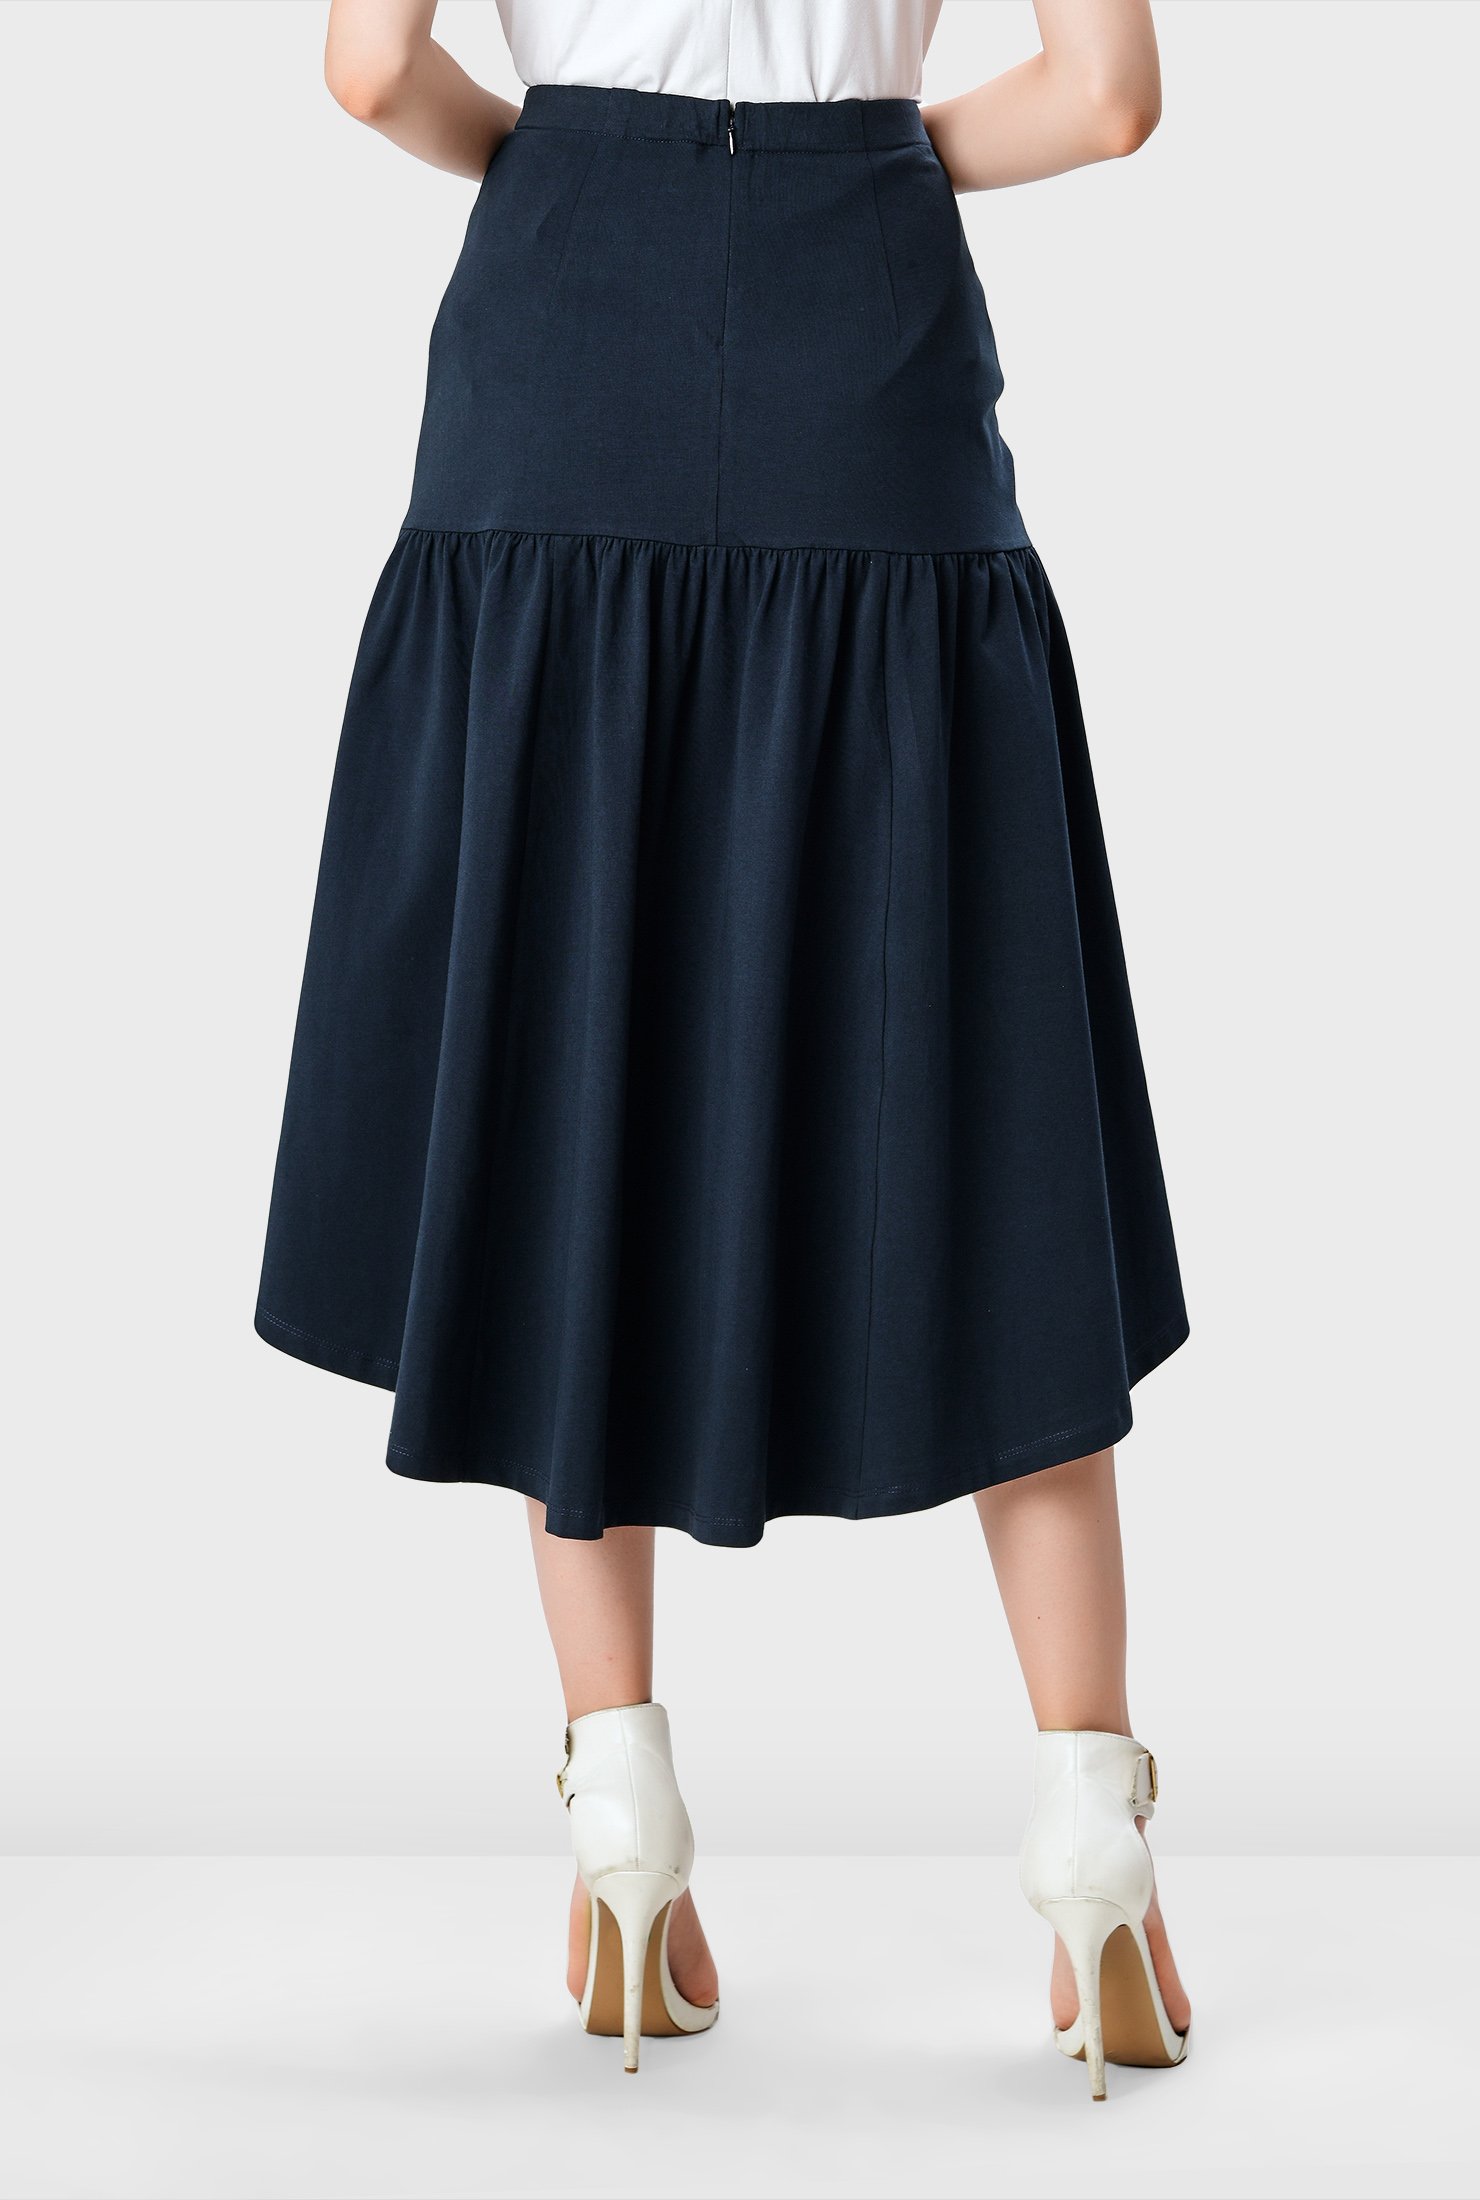 jersey knit ruched skirt